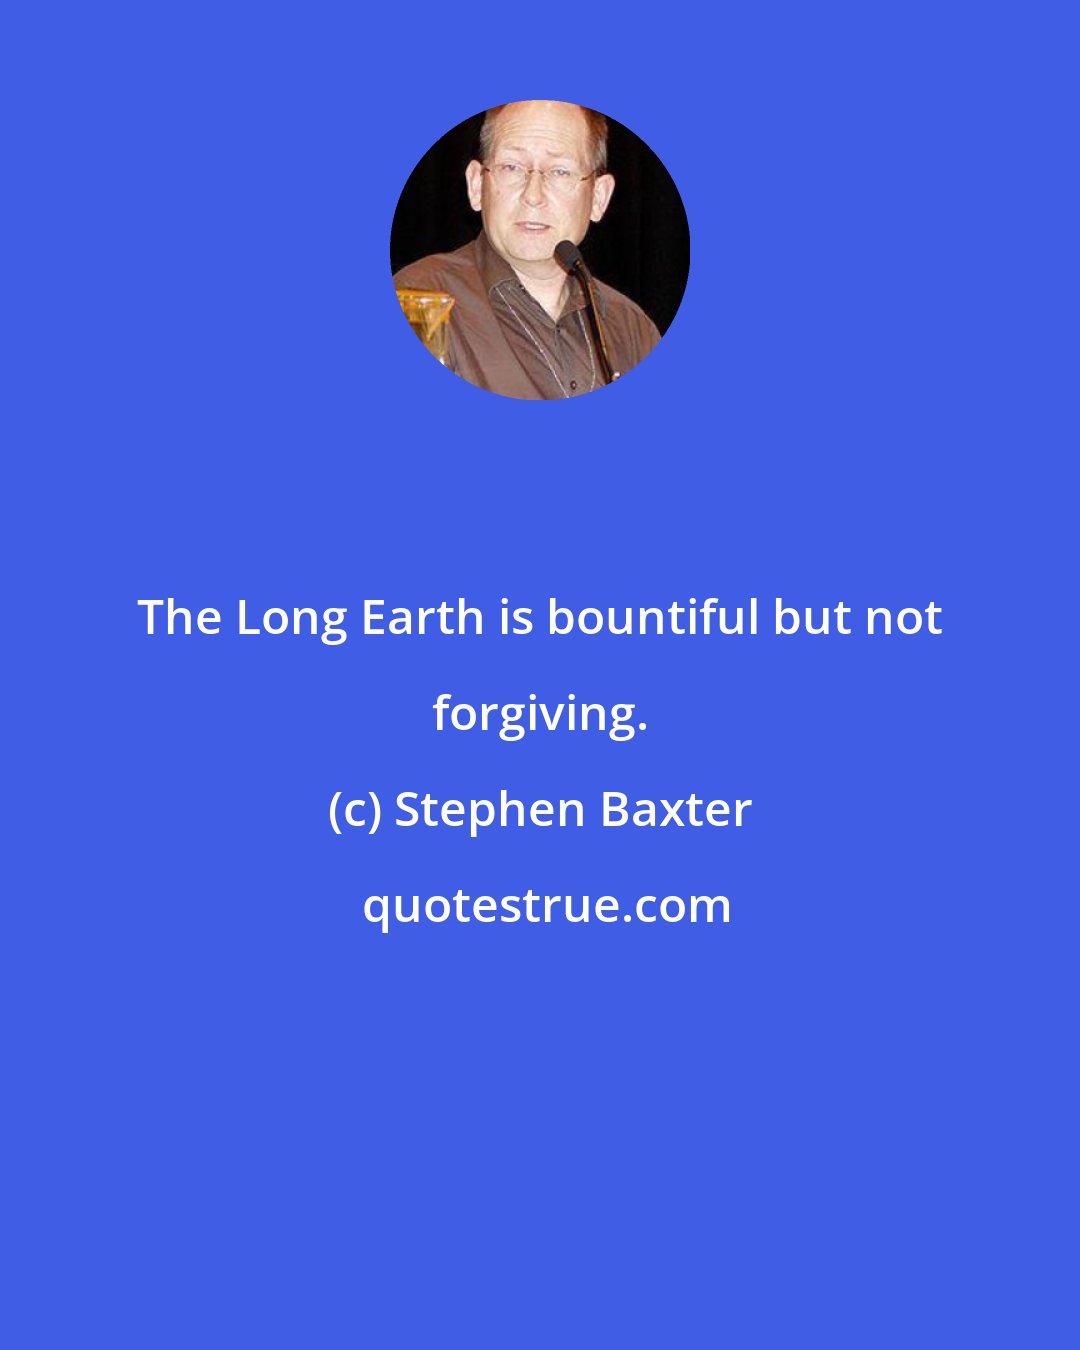 Stephen Baxter: The Long Earth is bountiful but not forgiving.